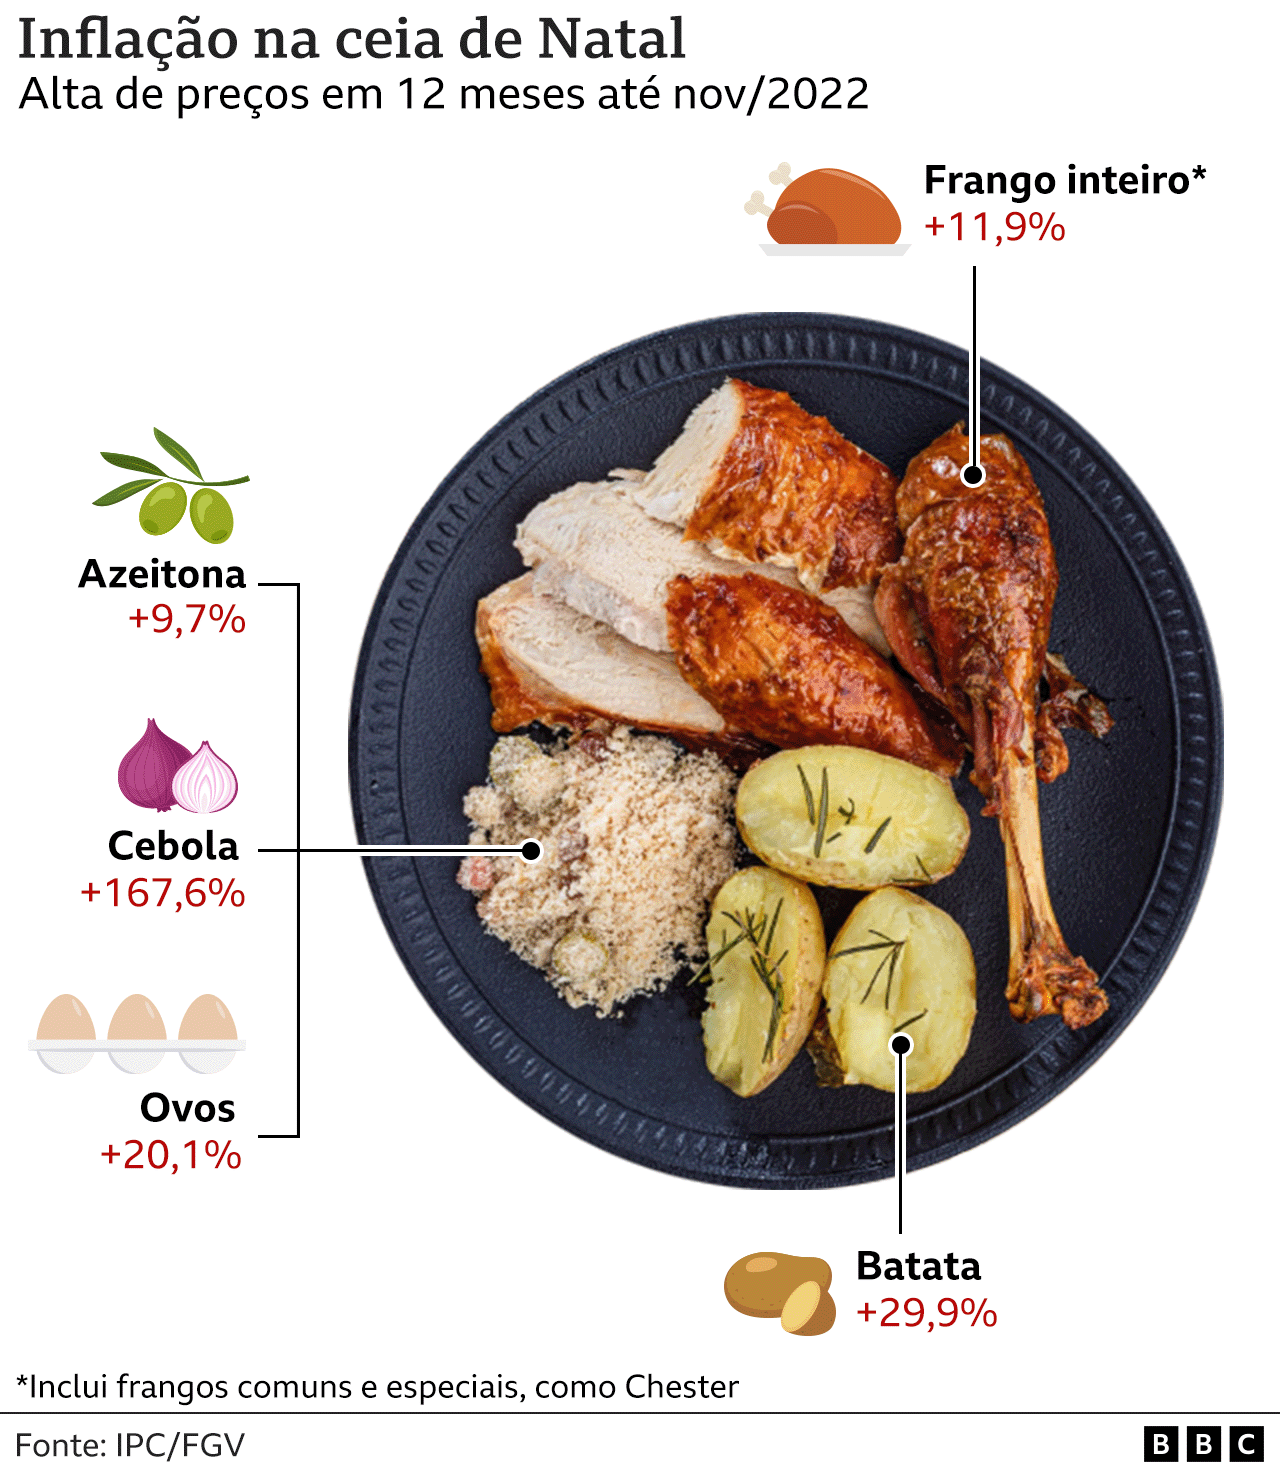 infographic shows dish with chicken, farofa and potato